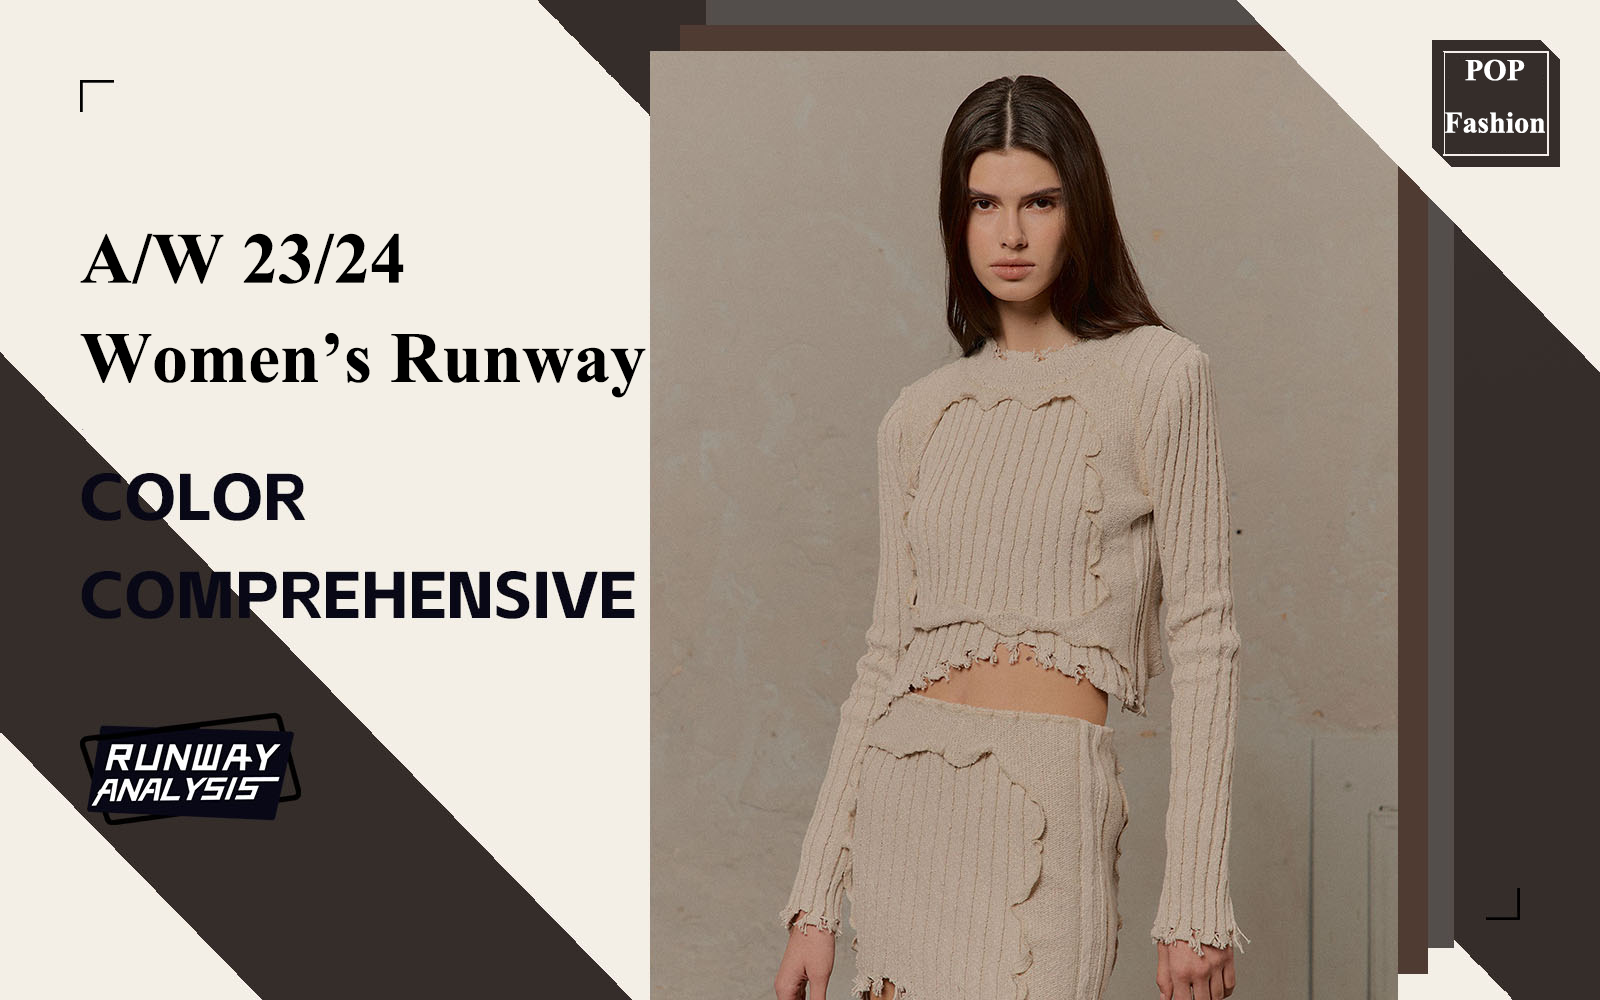 A/W 23/24 Key Colors -- The Comprehensive Runway Analysis of Womenswear(Part Two)